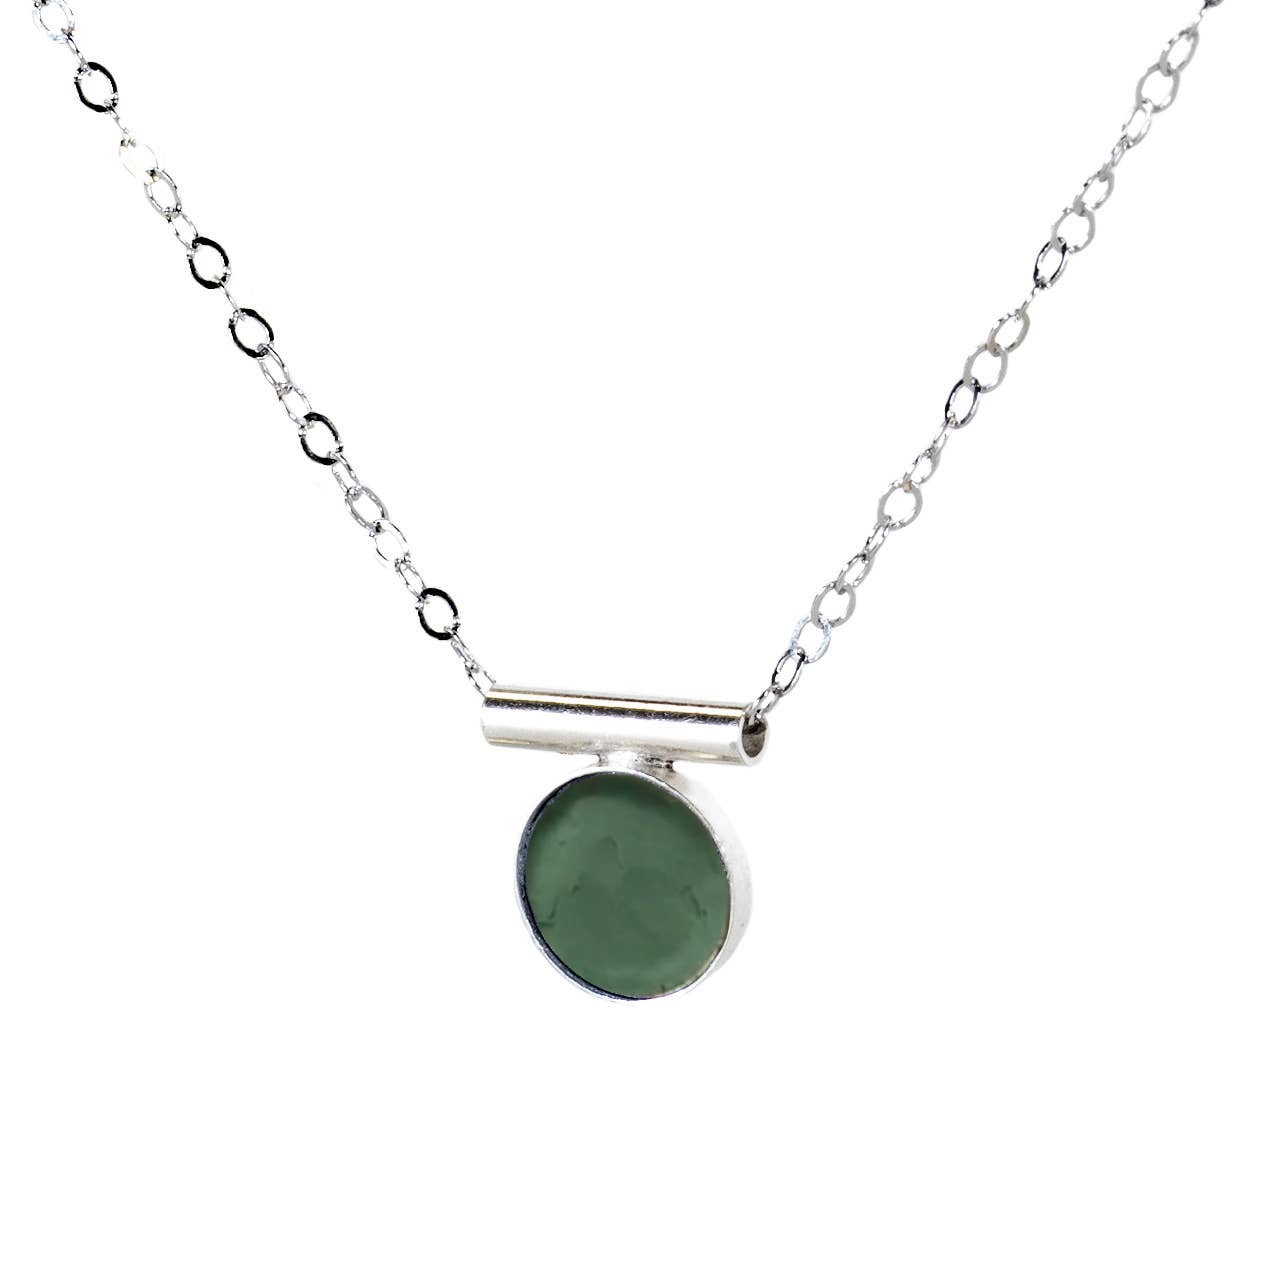 Inlay Chiefe Necklace: Gold Fill / Jade